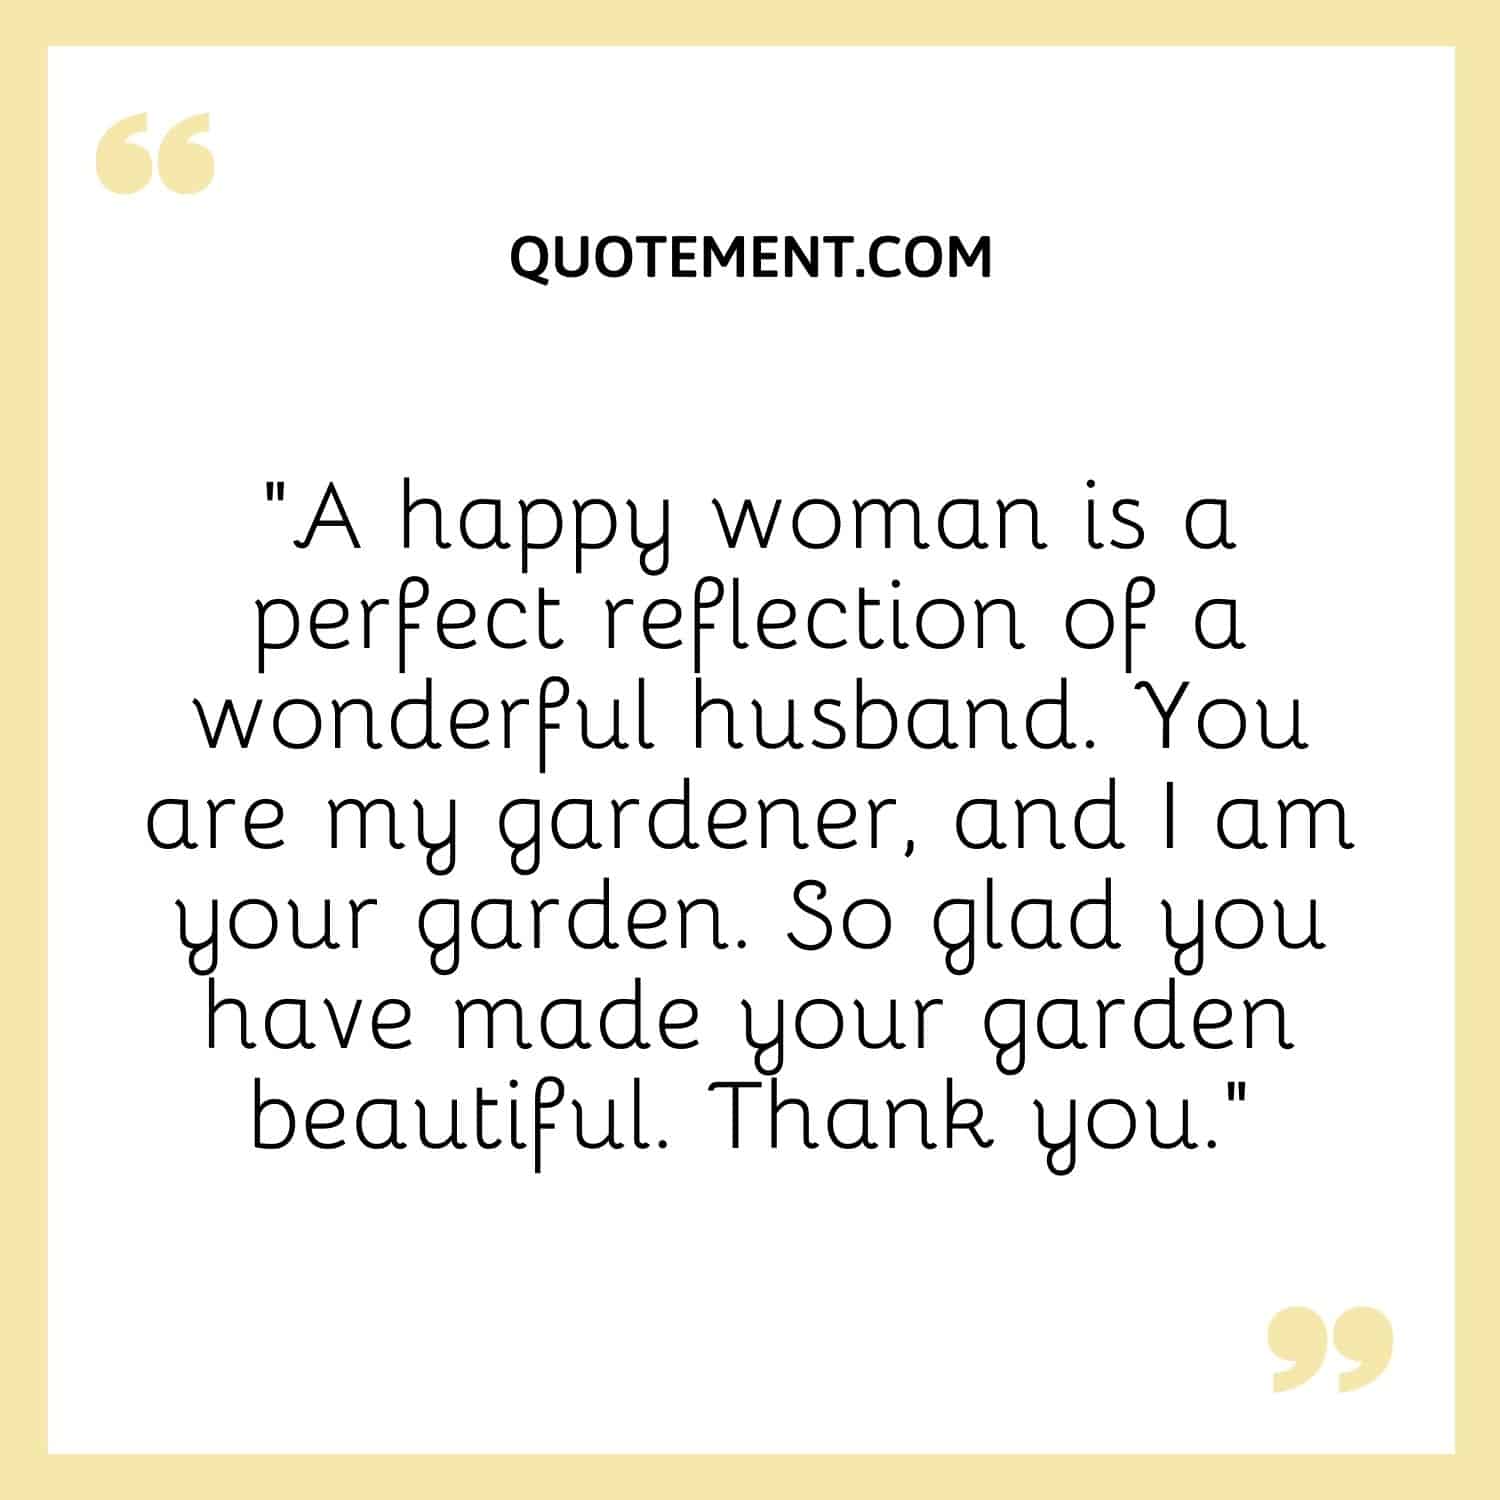 “A happy woman is a perfect reflection of a wonderful husband. You are my gardener, and I am your garden. So glad you have made your garden beautiful. Thank you.”